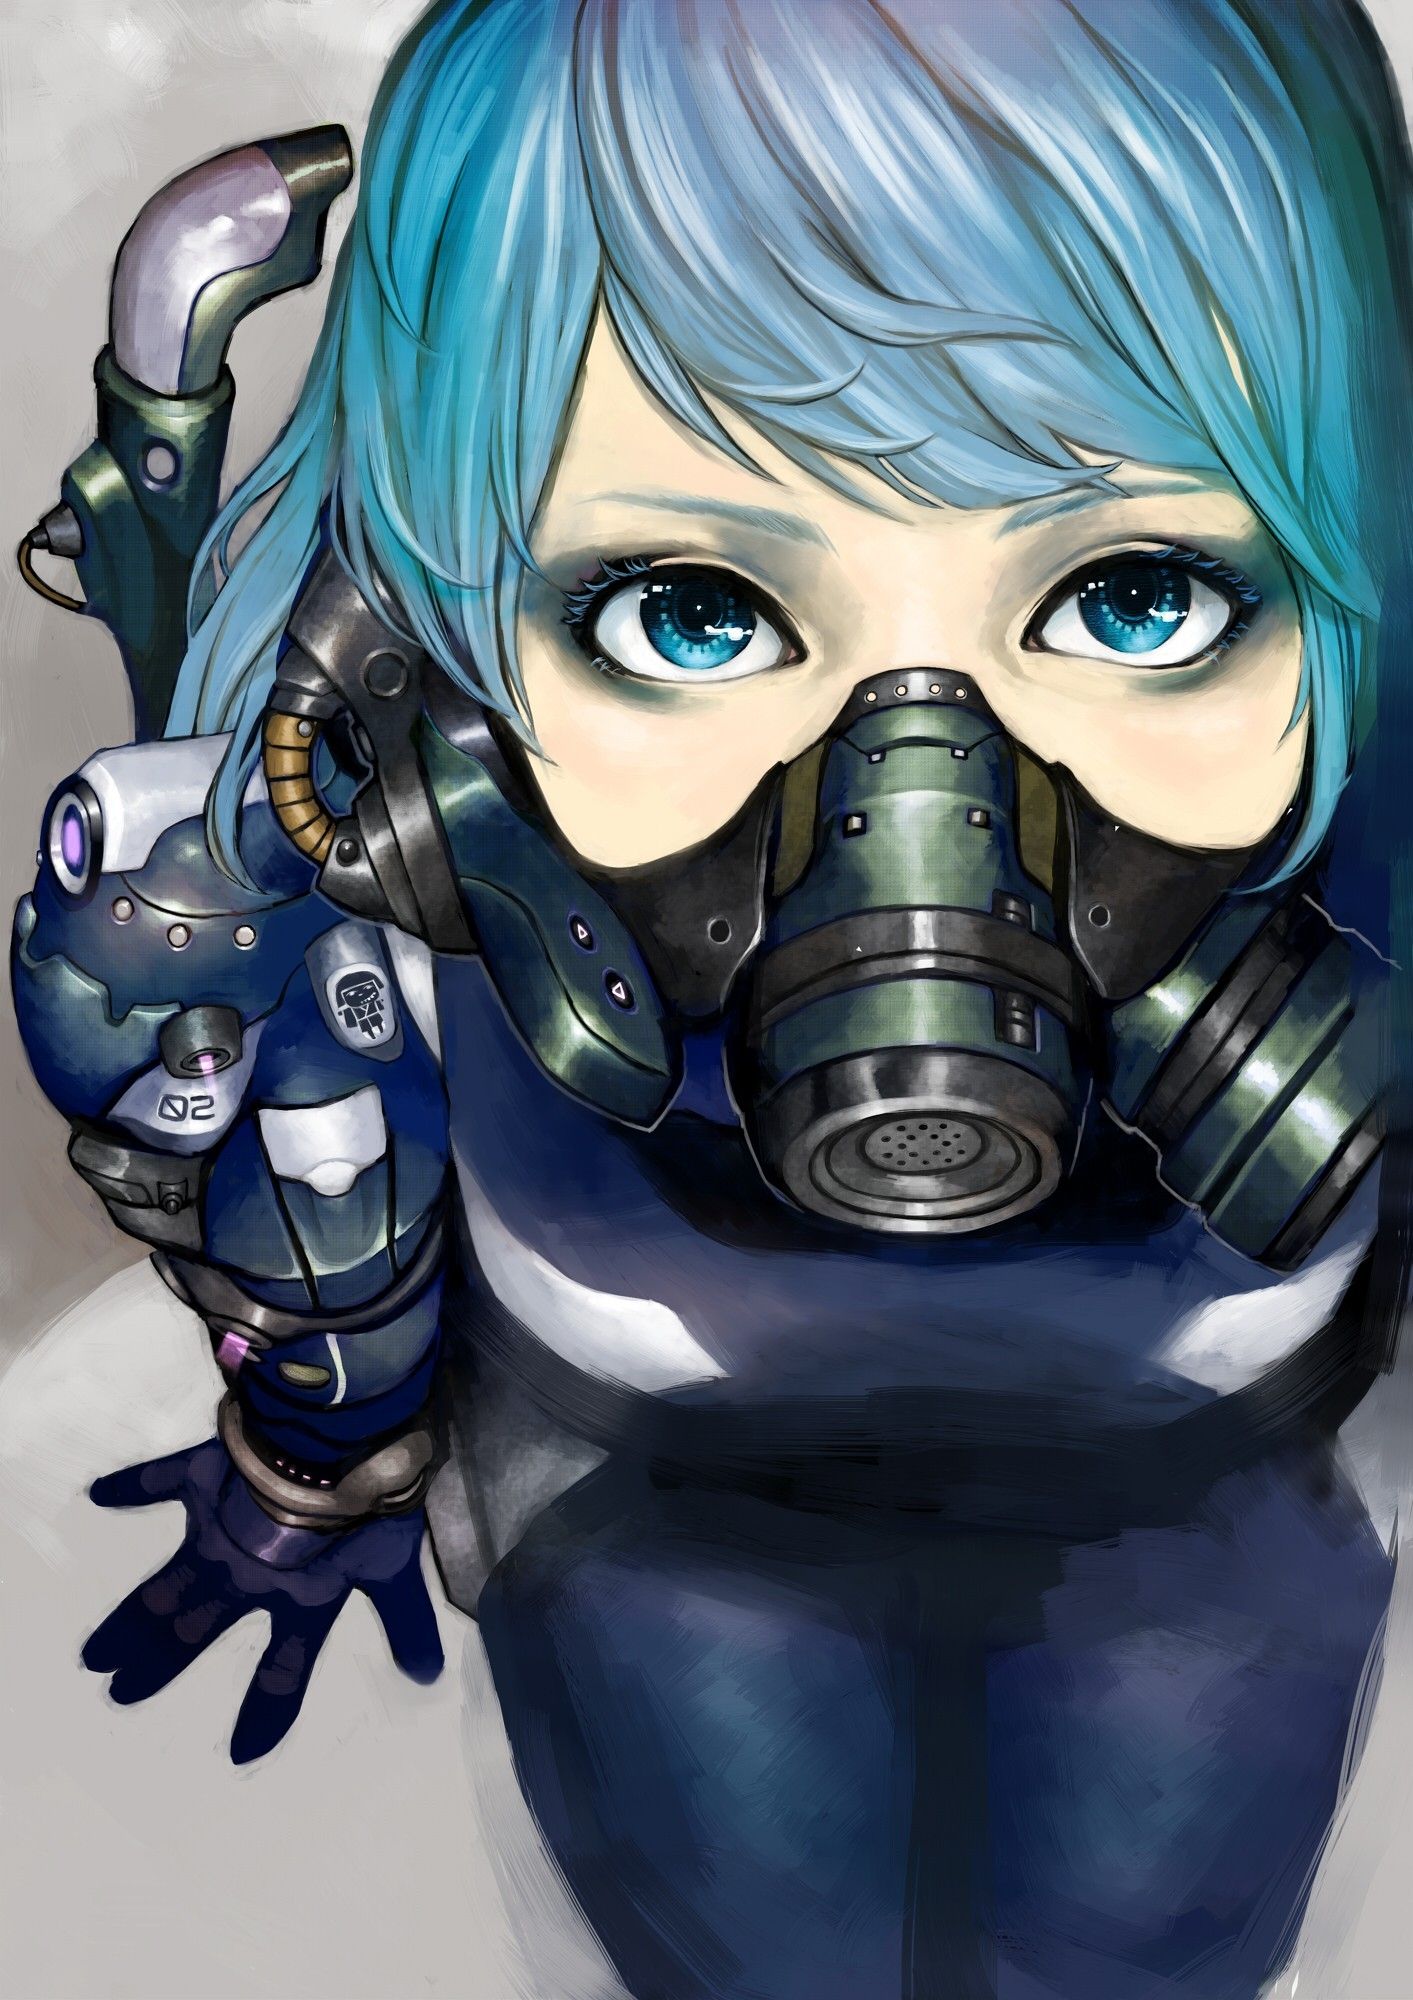 Anime Girl Gas Mask Wallpapers Wallpaper Cave 4117